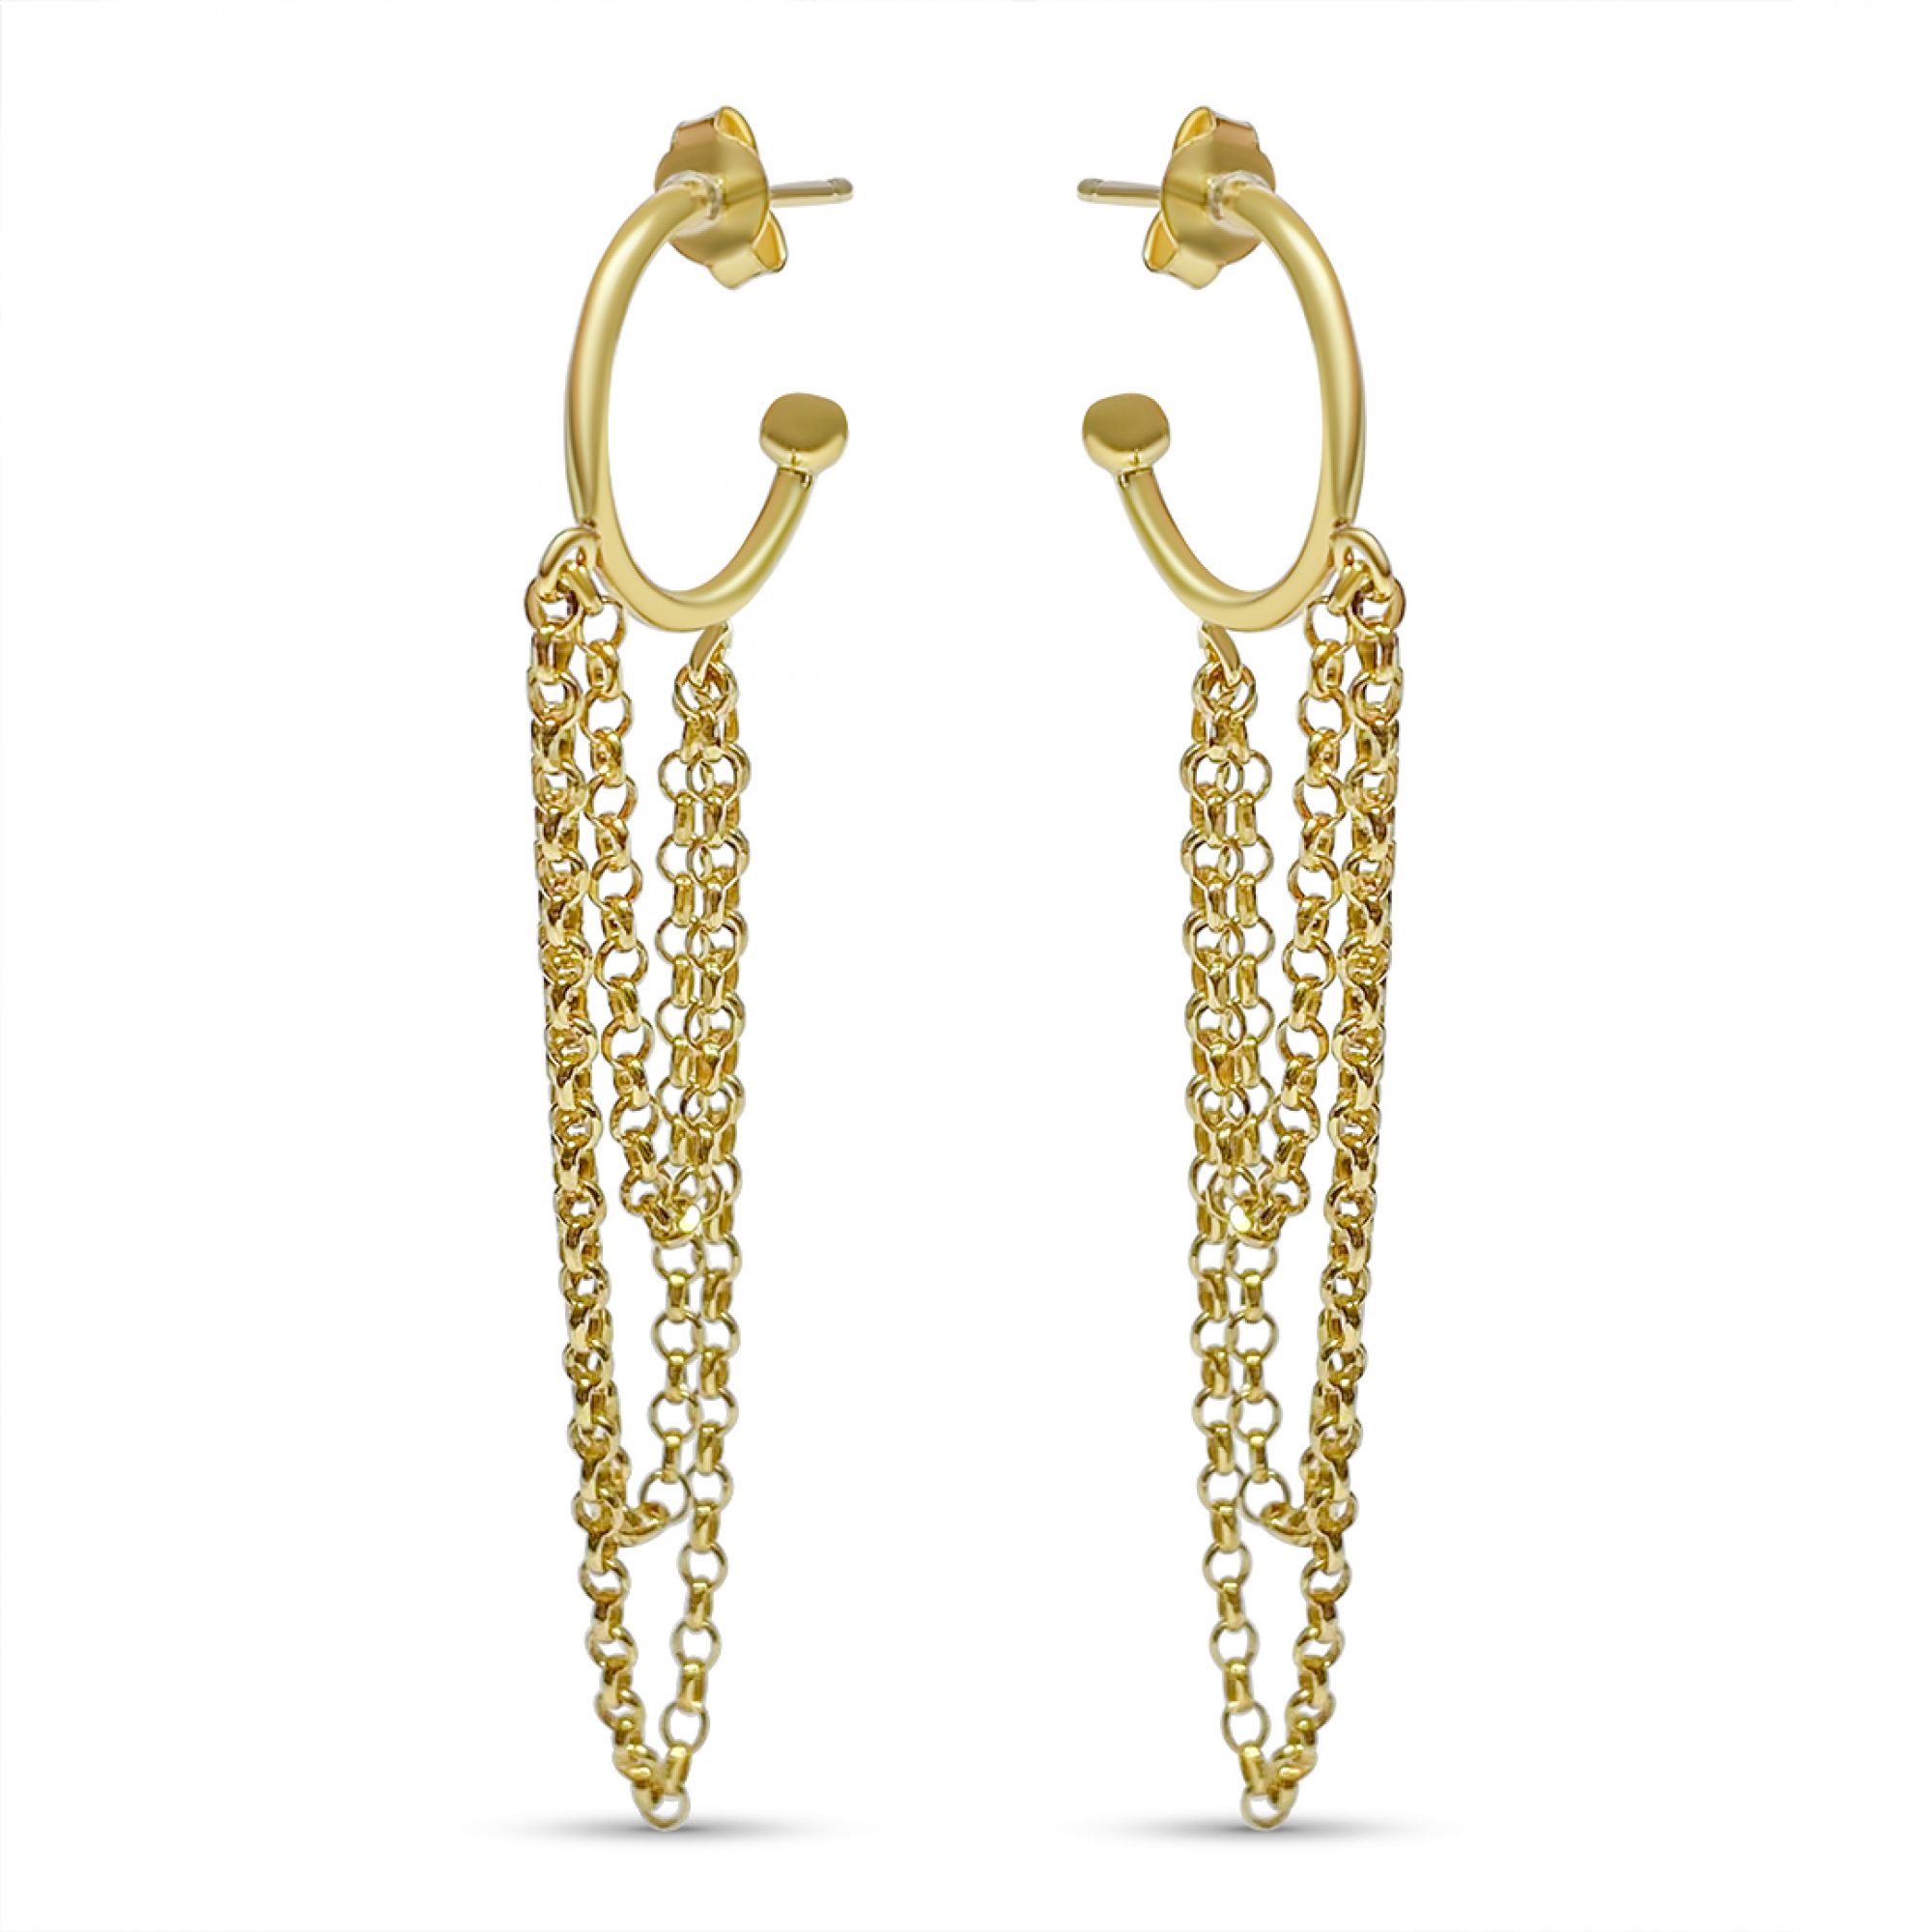 Gold plated earrings with dangle chains